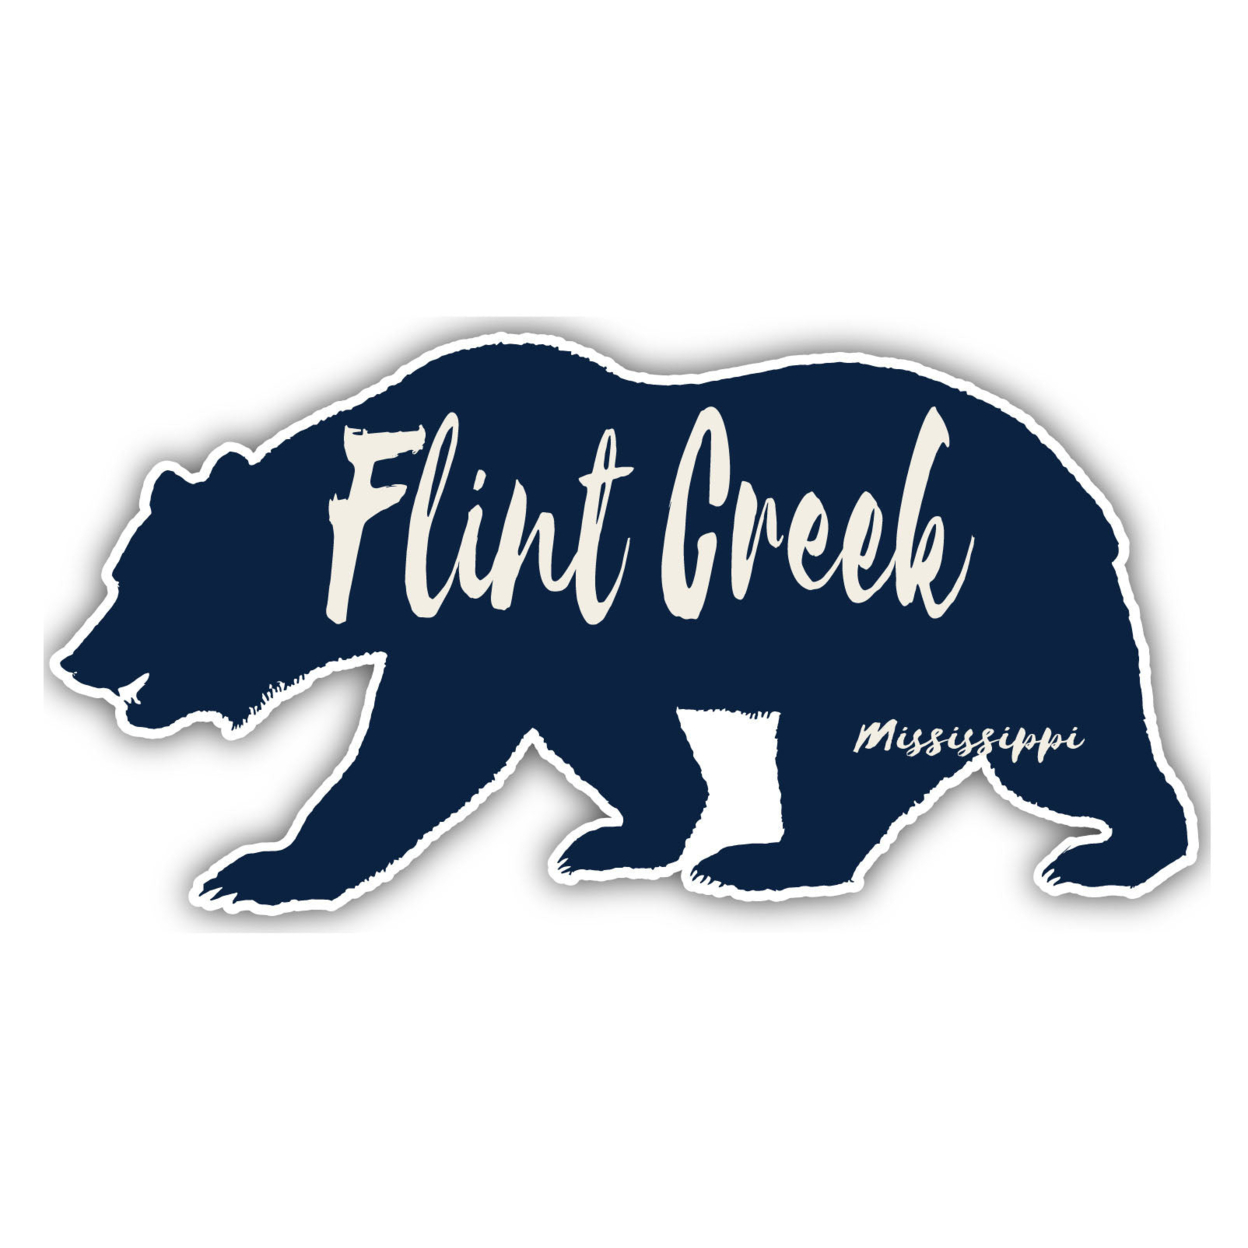 Flint Creek Mississippi Souvenir Decorative Stickers (Choose Theme And Size) - 4-Pack, 8-Inch, Bear